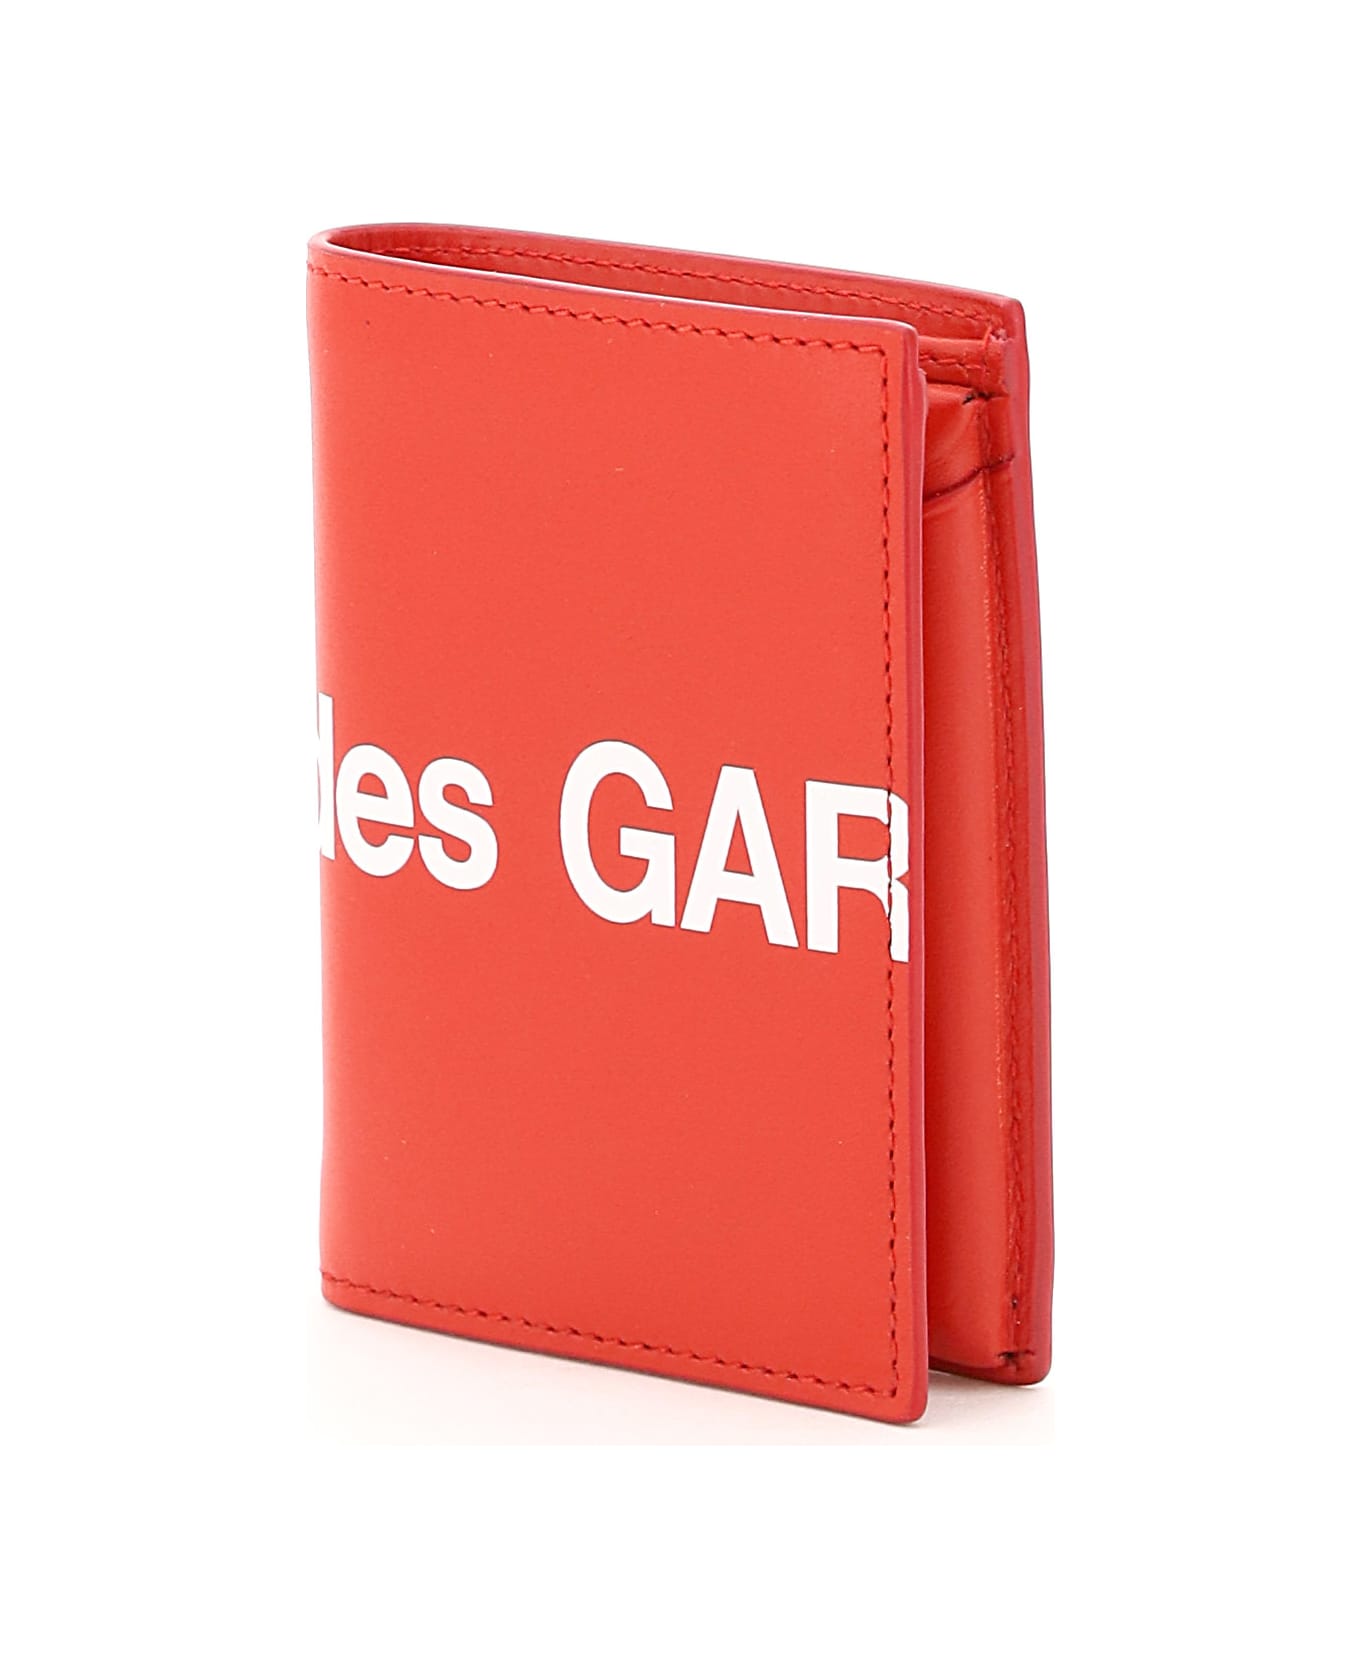 Comme des Garçons Wallet Small Bifold Wallet With Huge Logo - RED (Red) 財布